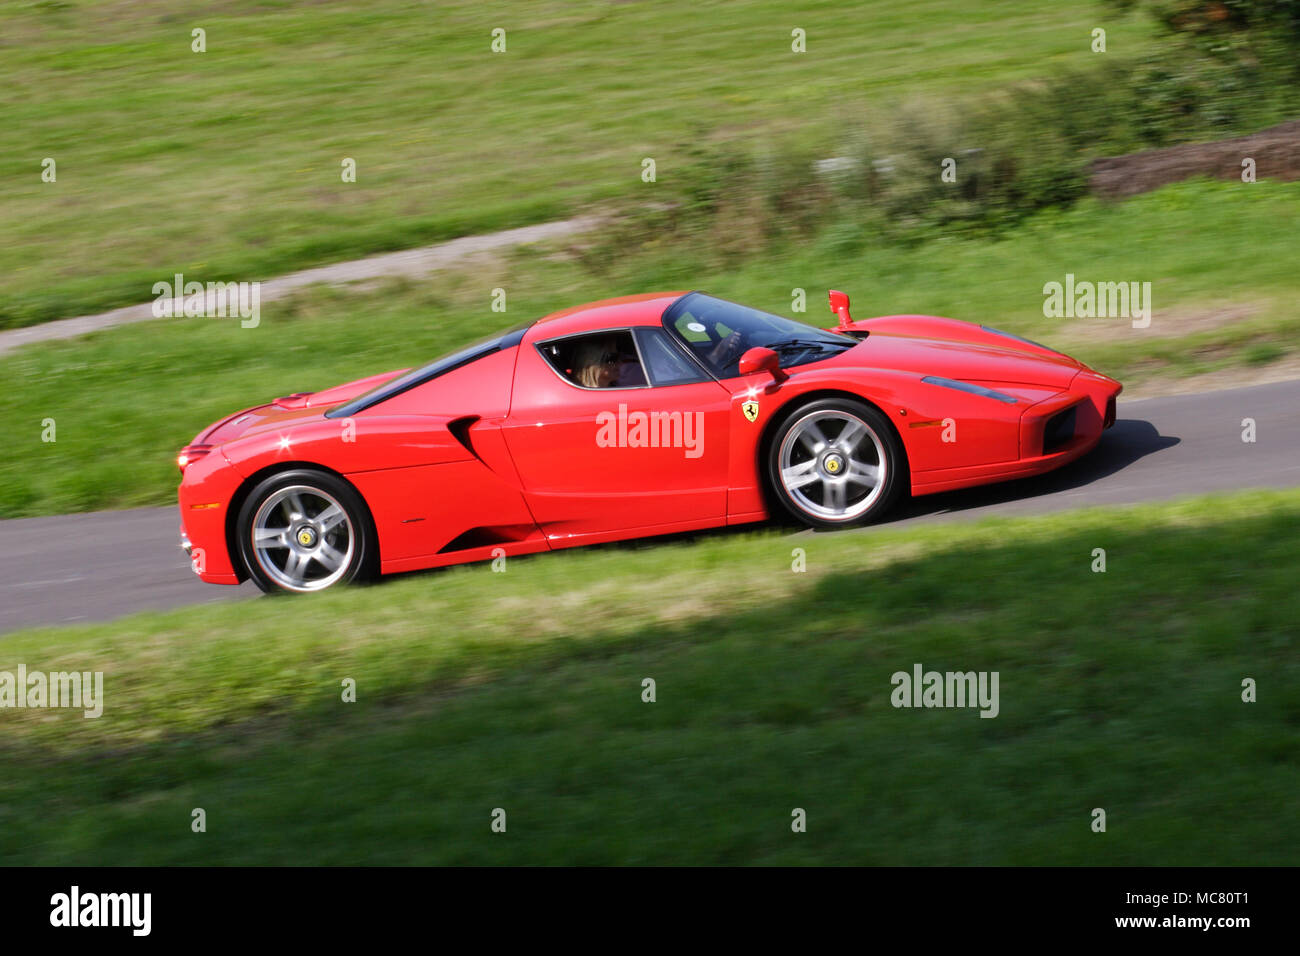 Profile (side view) of a sexy Red Ferrari Enzo mid-engined V12 hyper car driving fast Stock Photo